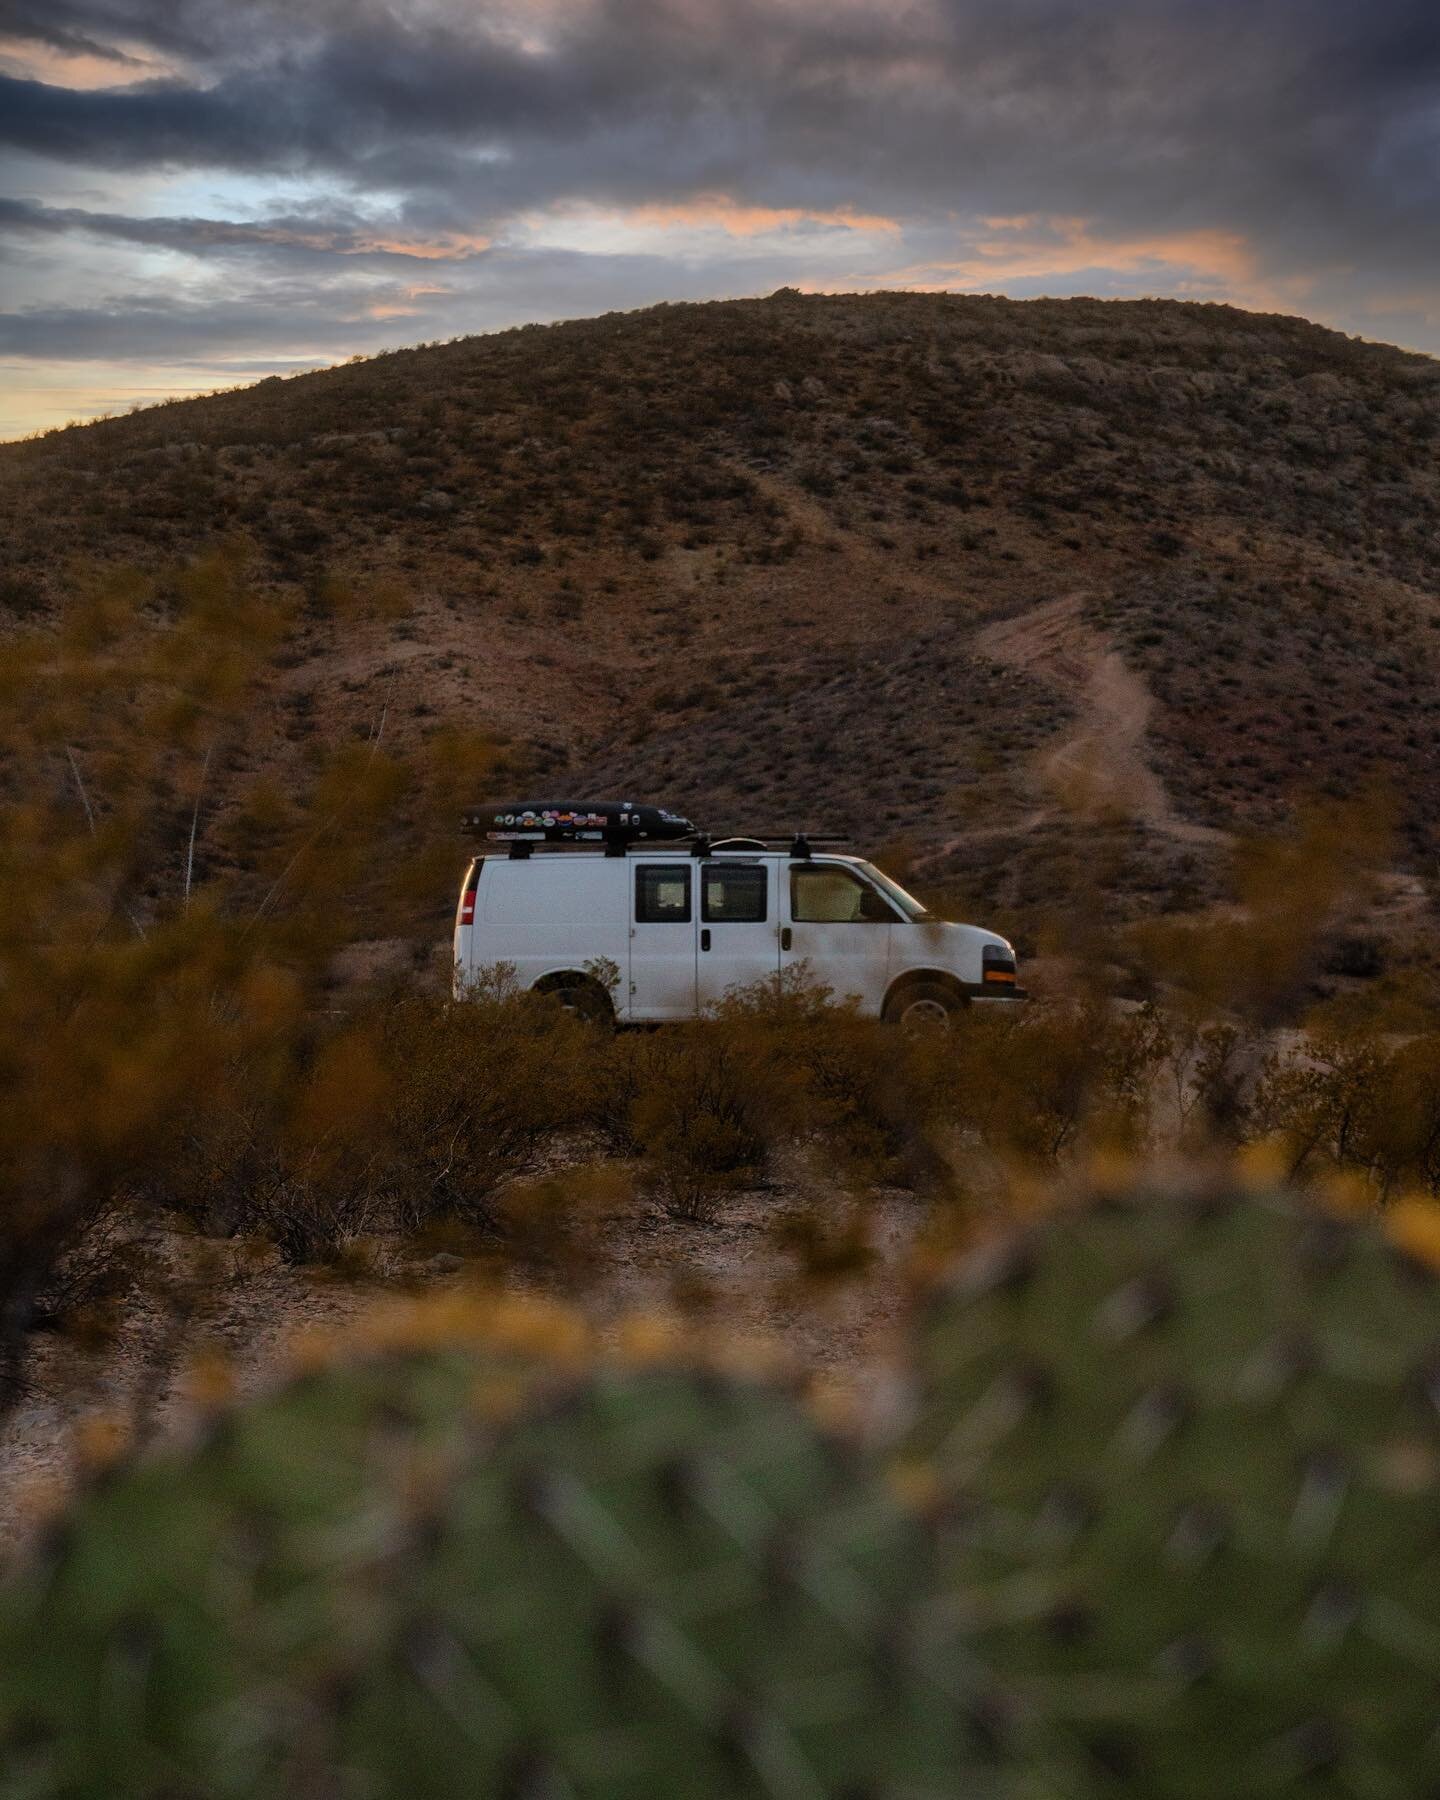 Hey Folks! 🌿 &mdash; Been taking a break from this project lately as I consider how the concept of EcoVan.org best fits into this new future we're emerging into.
🌾
The #Vanlife movement seems like it's evolving into more of an industry as people fl